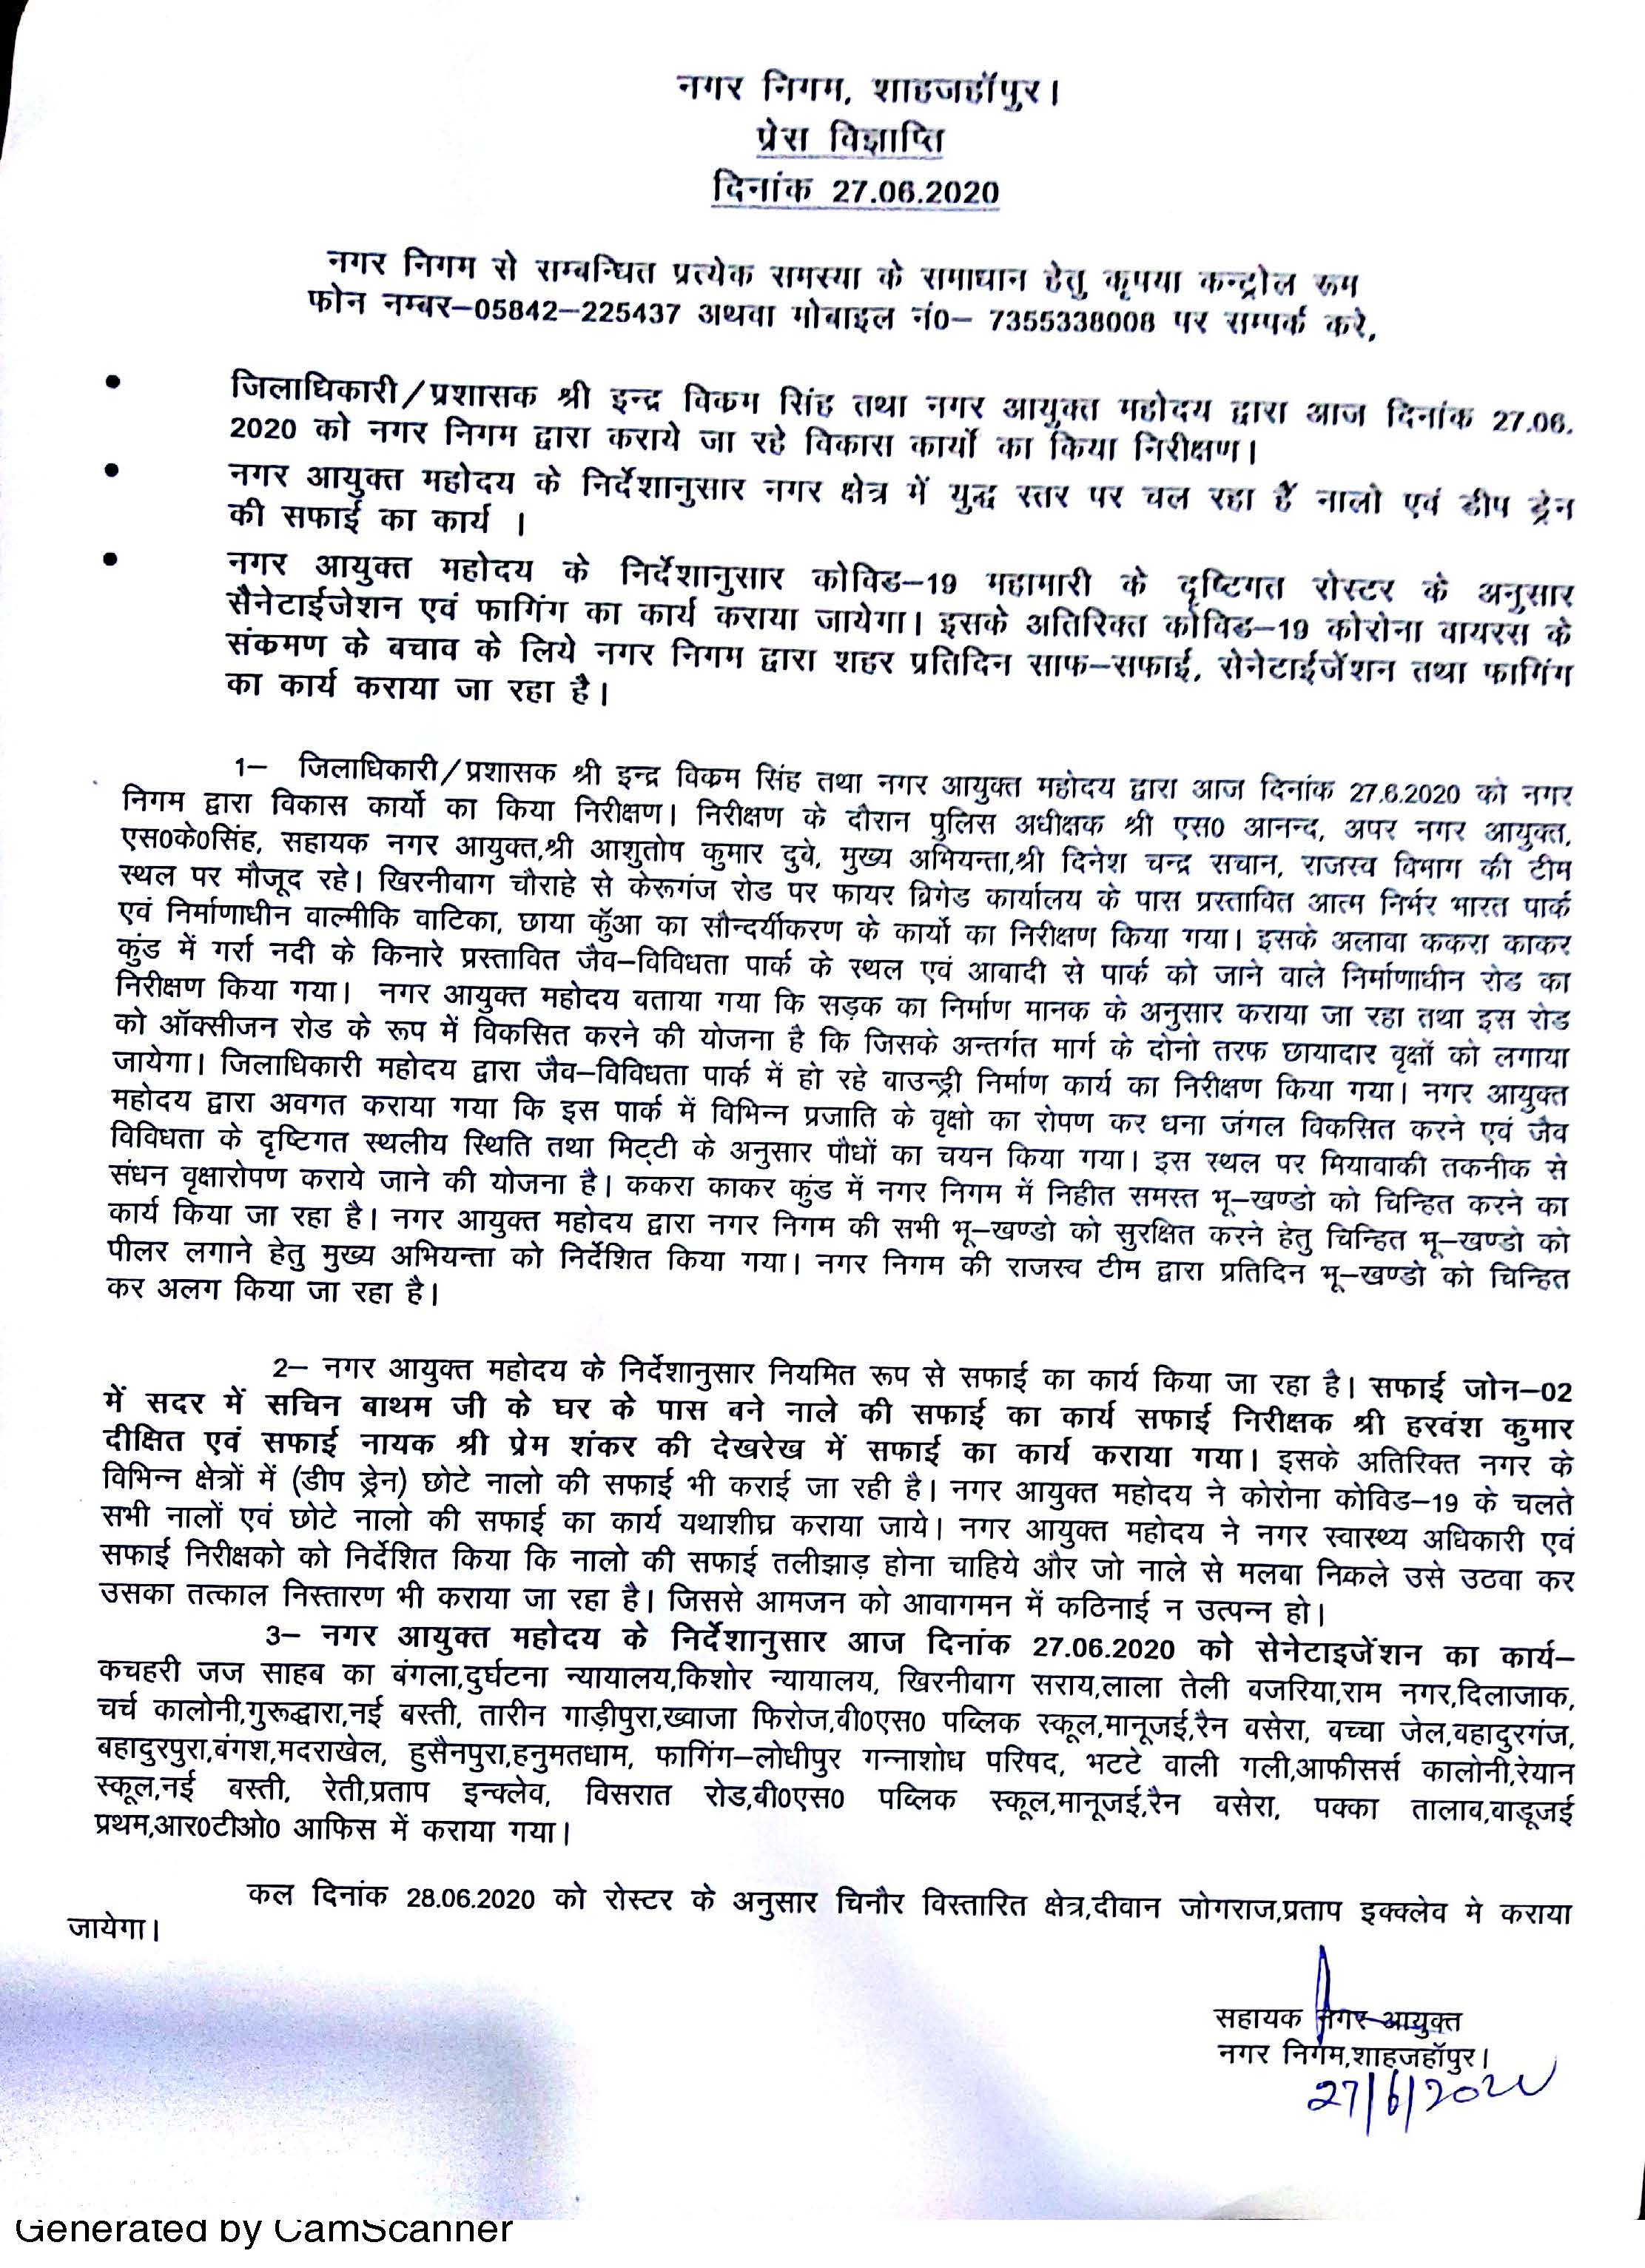 Regarding press release against the war level cleanliness works and sanitization done on 27.06.2020  in various cleanliness zones of the city as per City Commissioner’s guidelines